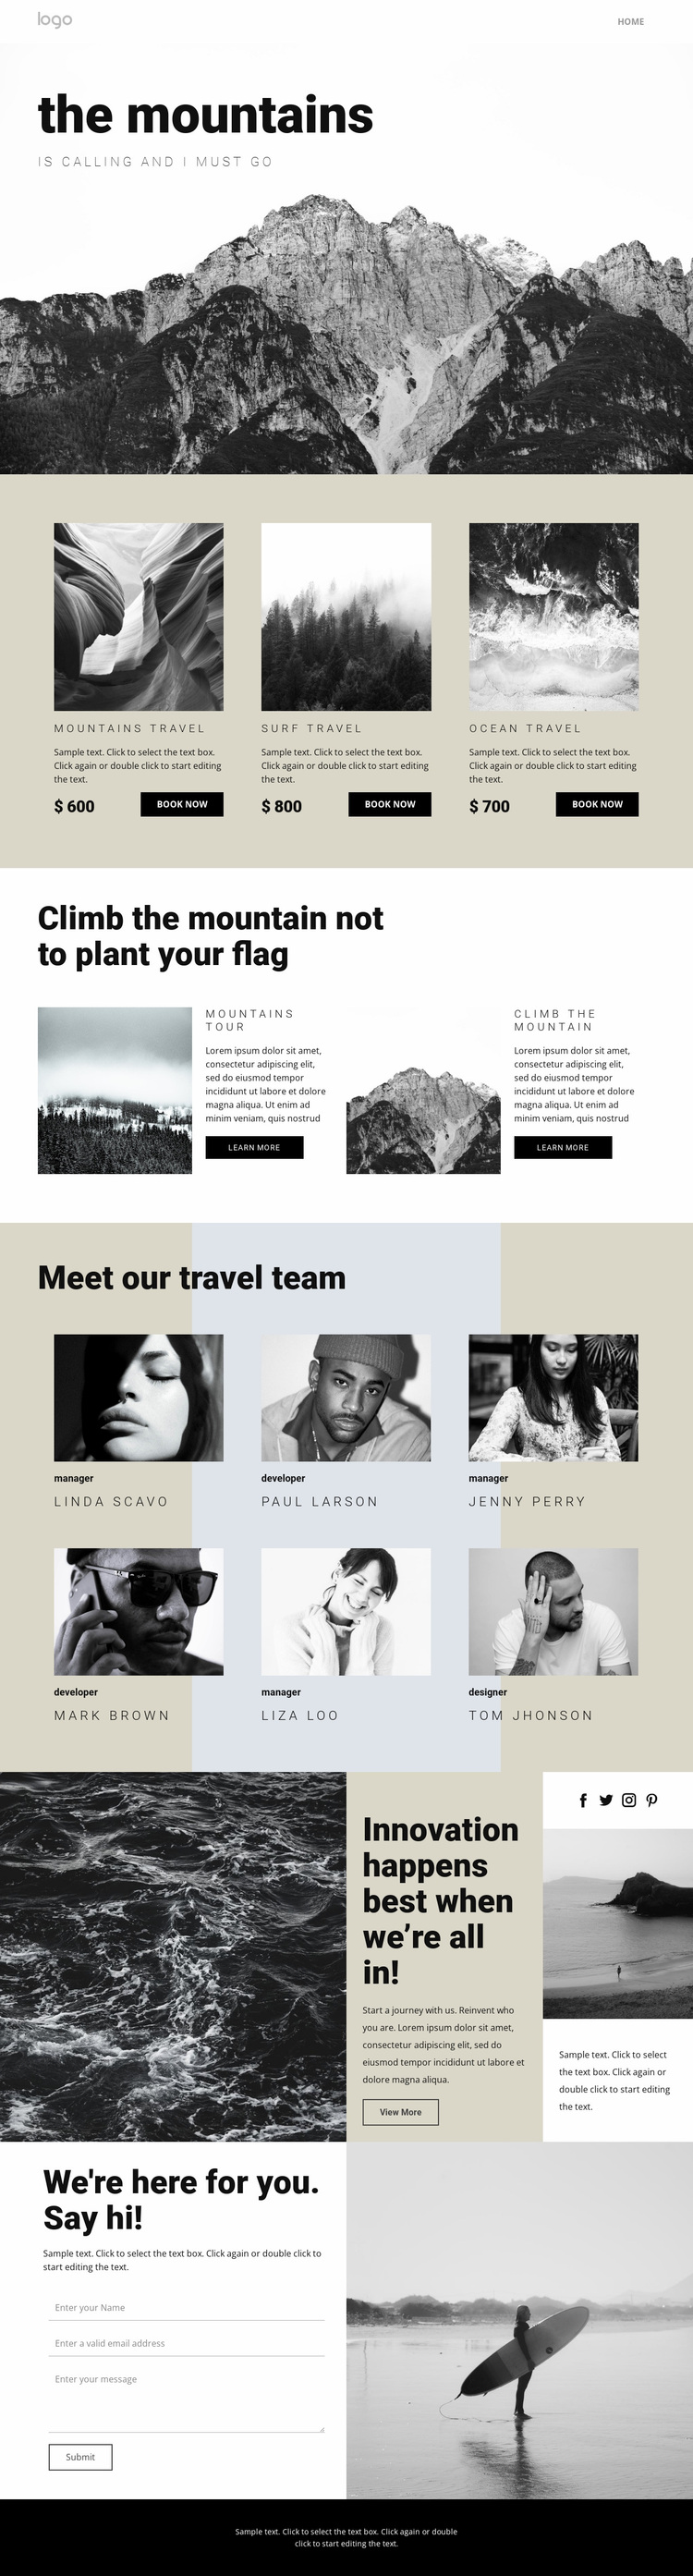 Agency for people who travel Website Design